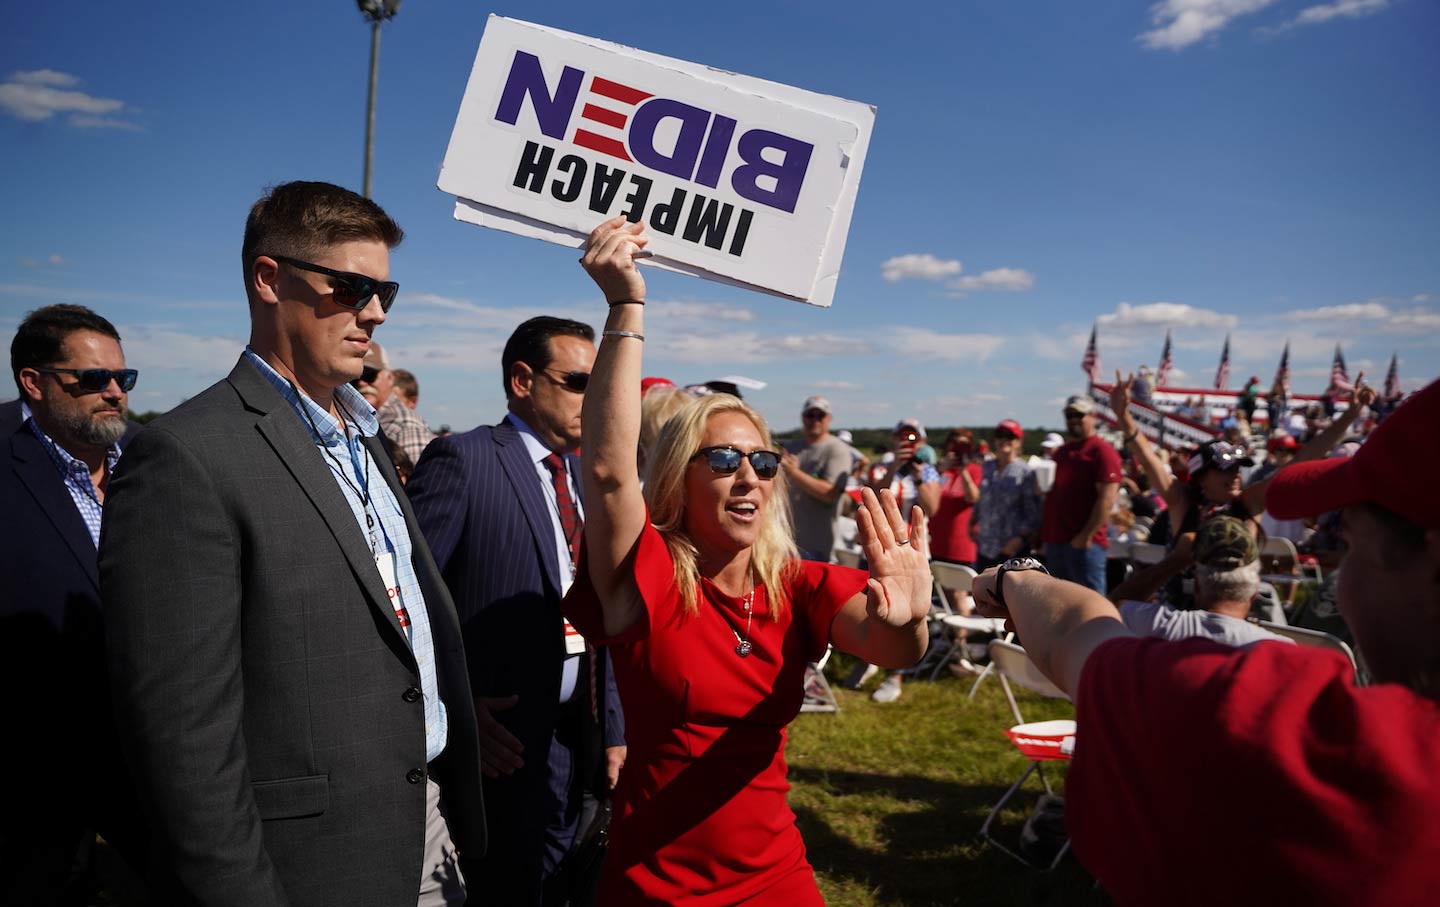 Representative Marjorie Taylor Greene (R-GA) greets supporters at a rally featuring former US president Donald Trump on September 25, 2021, in Perry, Georgia.